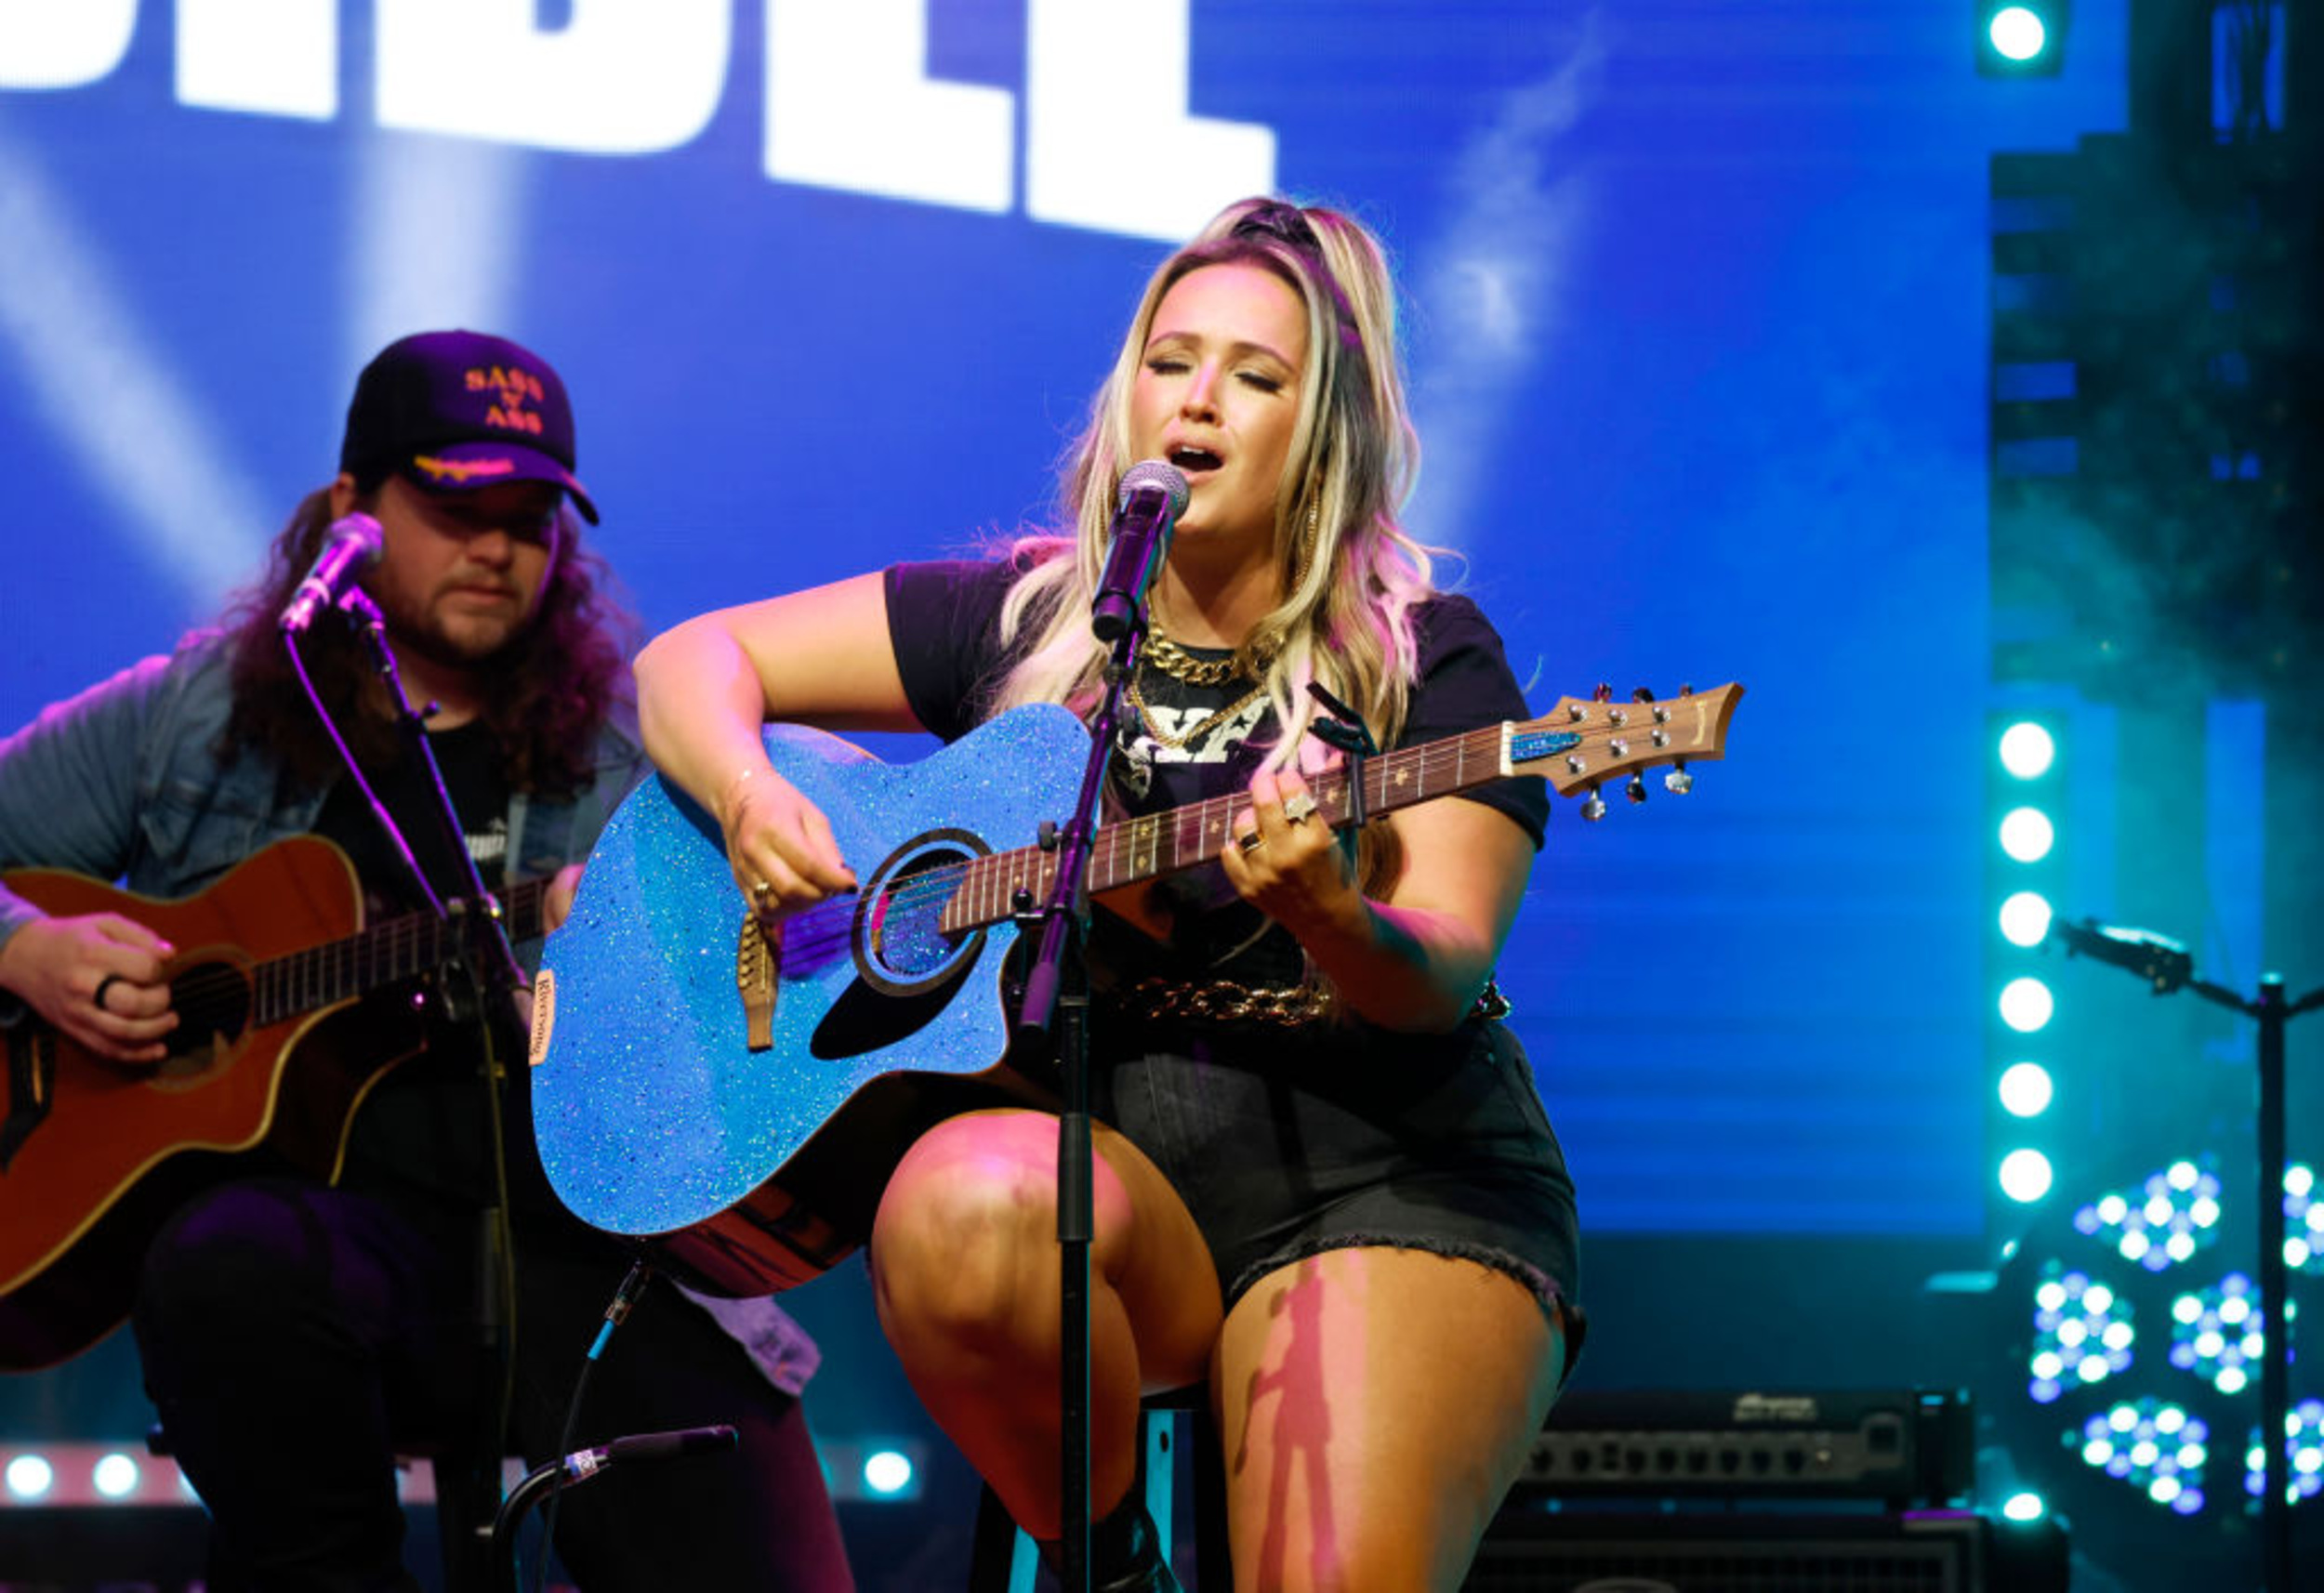 <p>She's already gone viral on TikTok and sold a ton of records, but for whatever reason, Priscilla Block isn't a household name just yet. That could all change in 2024, as she gears up for a really big year. She's headed out on a major North American tour in support of her song "Hey Jack," and fans are definitely going to fall in love with her hard-partying live show. </p><p>You may also like: <a href='https://www.yardbarker.com/entertainment/articles/20_films_about_math_mathematicians_and_math_geniuses_032524/s1__28630979'>20 films about math, mathematicians and math geniuses</a></p>